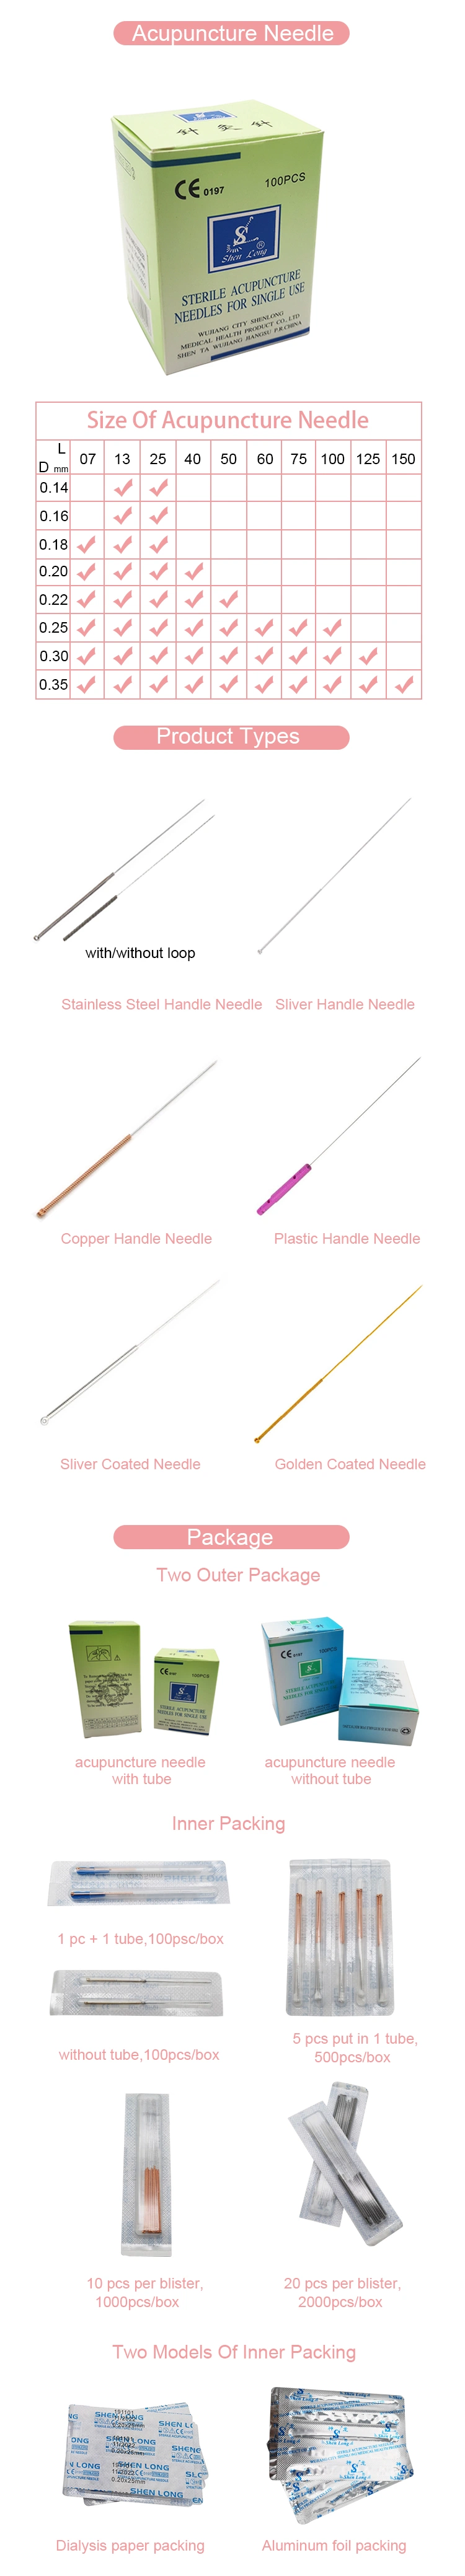 Huanqiu Acupuncture Single Use Metal Wire Handle Acupuncture Needles 0.14 with Guide Tubes